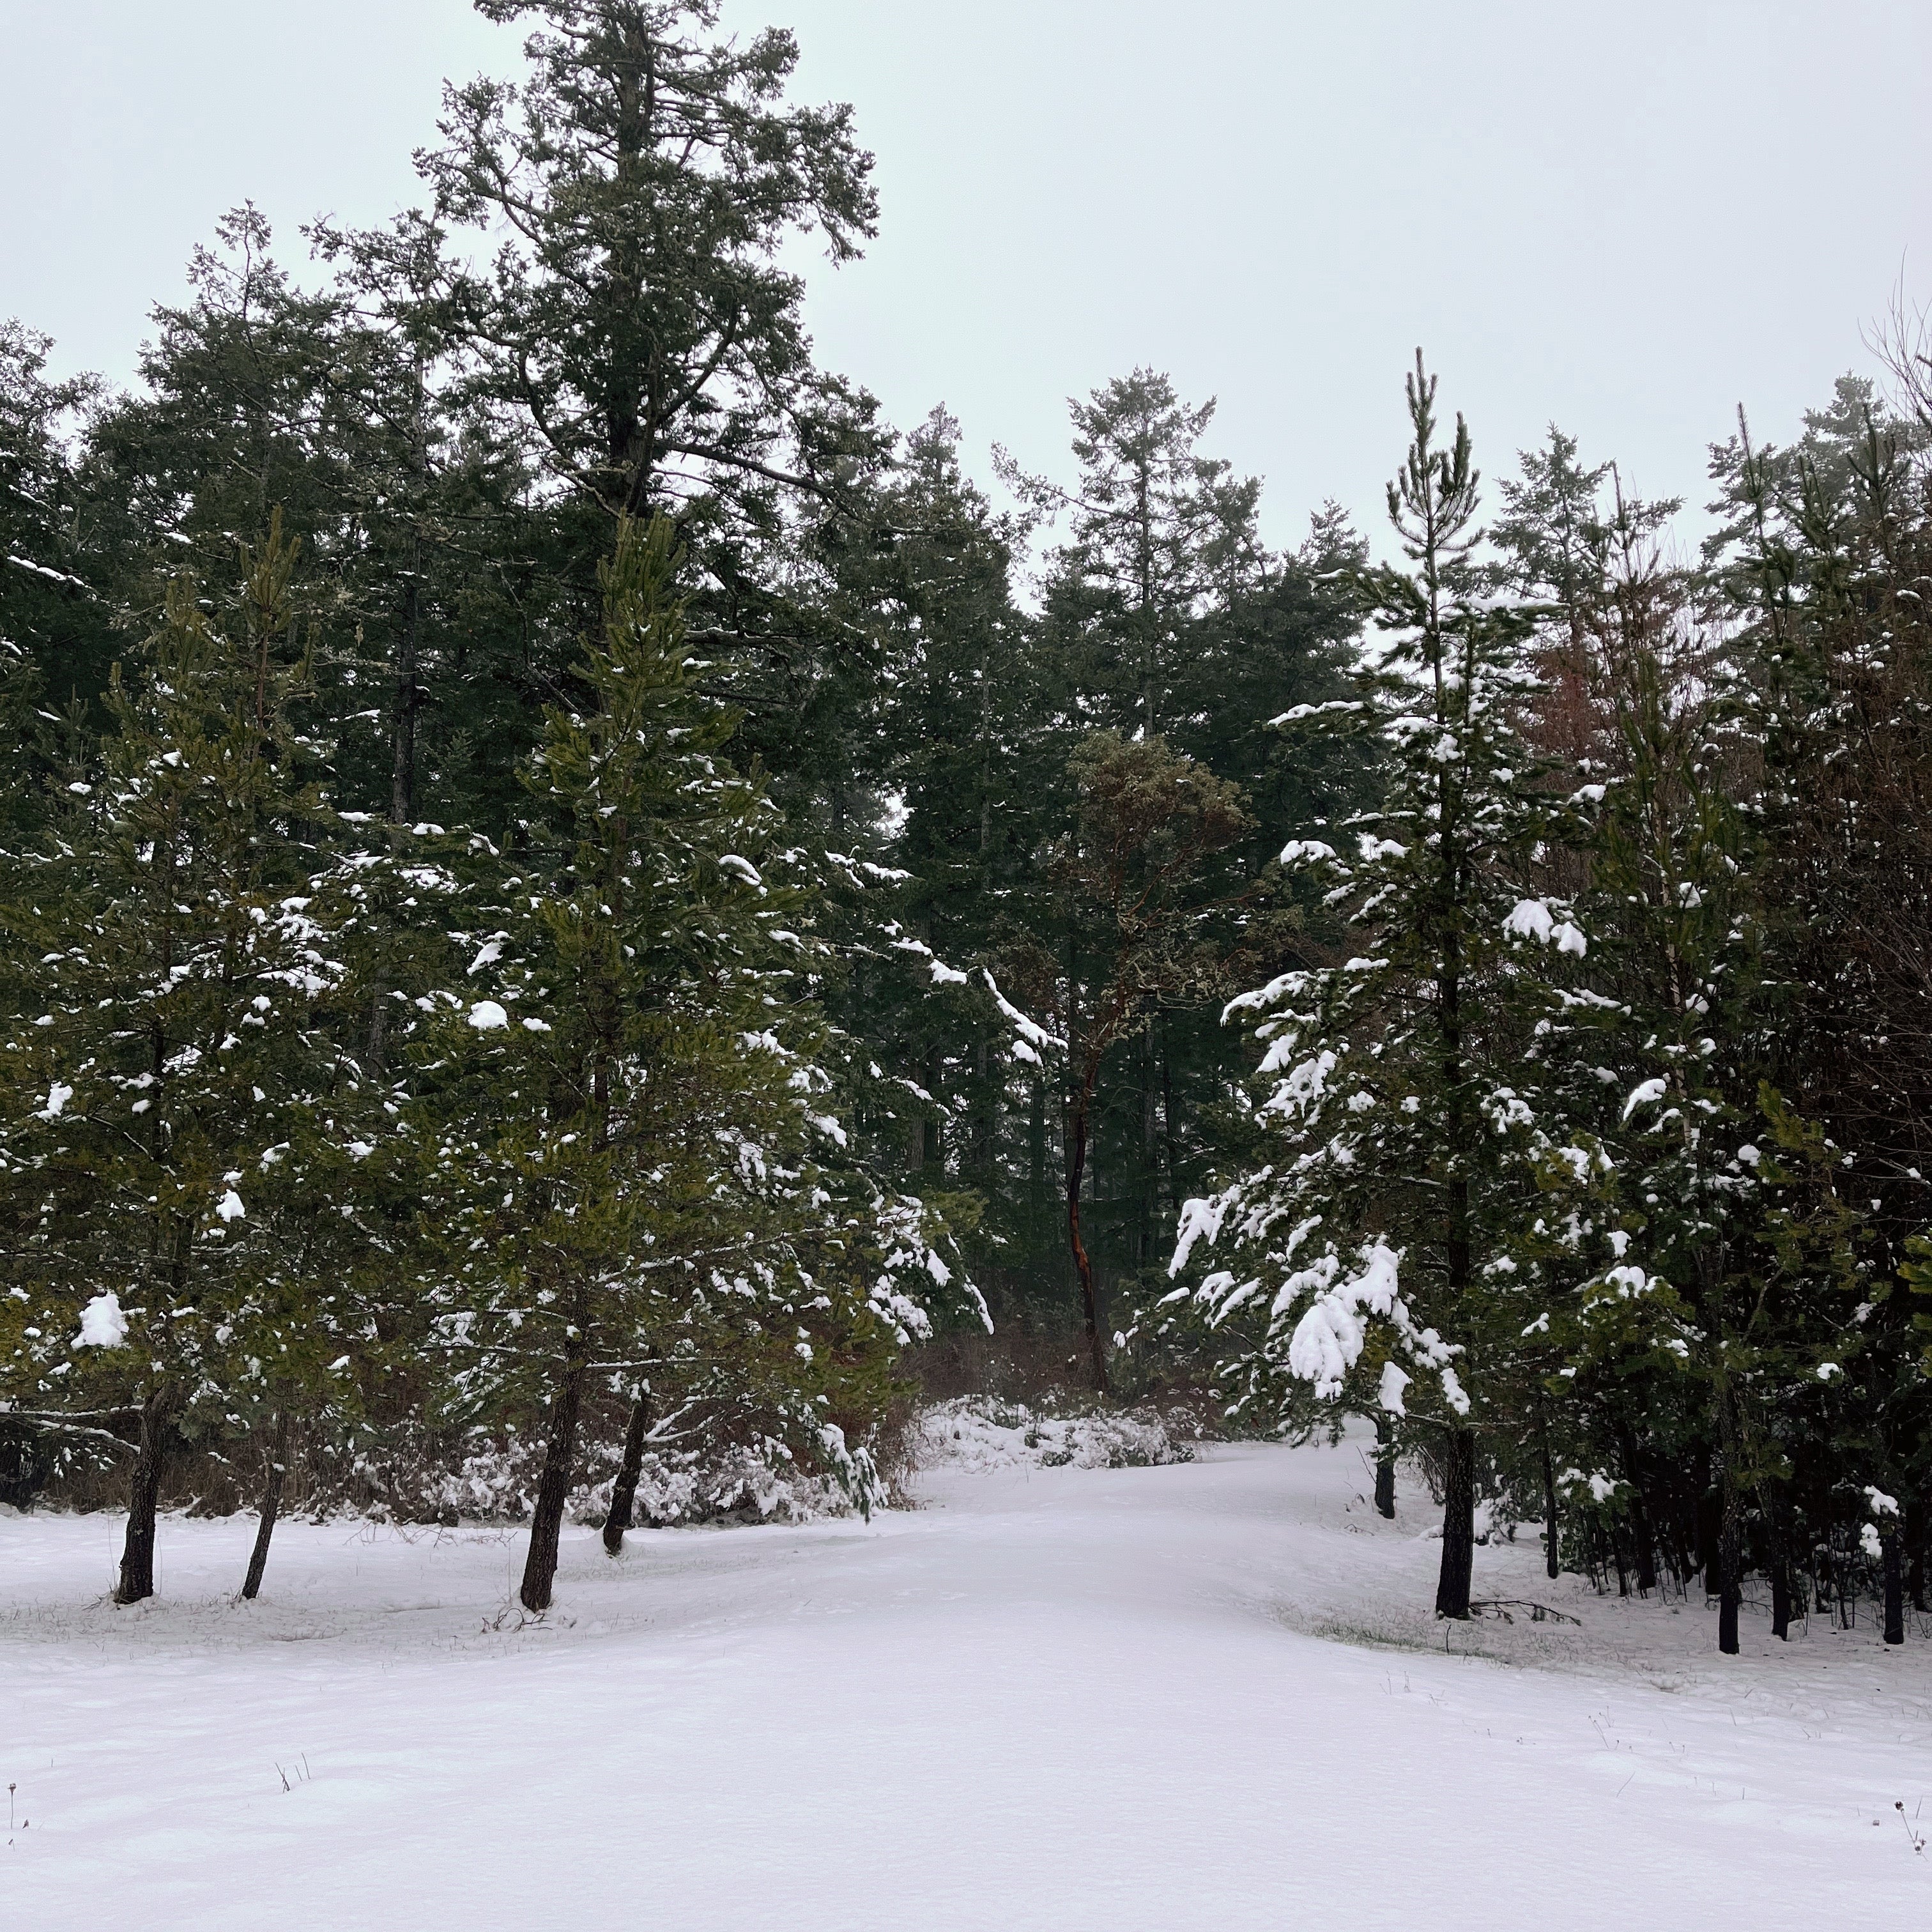 An image of pines in the fresh white snow.